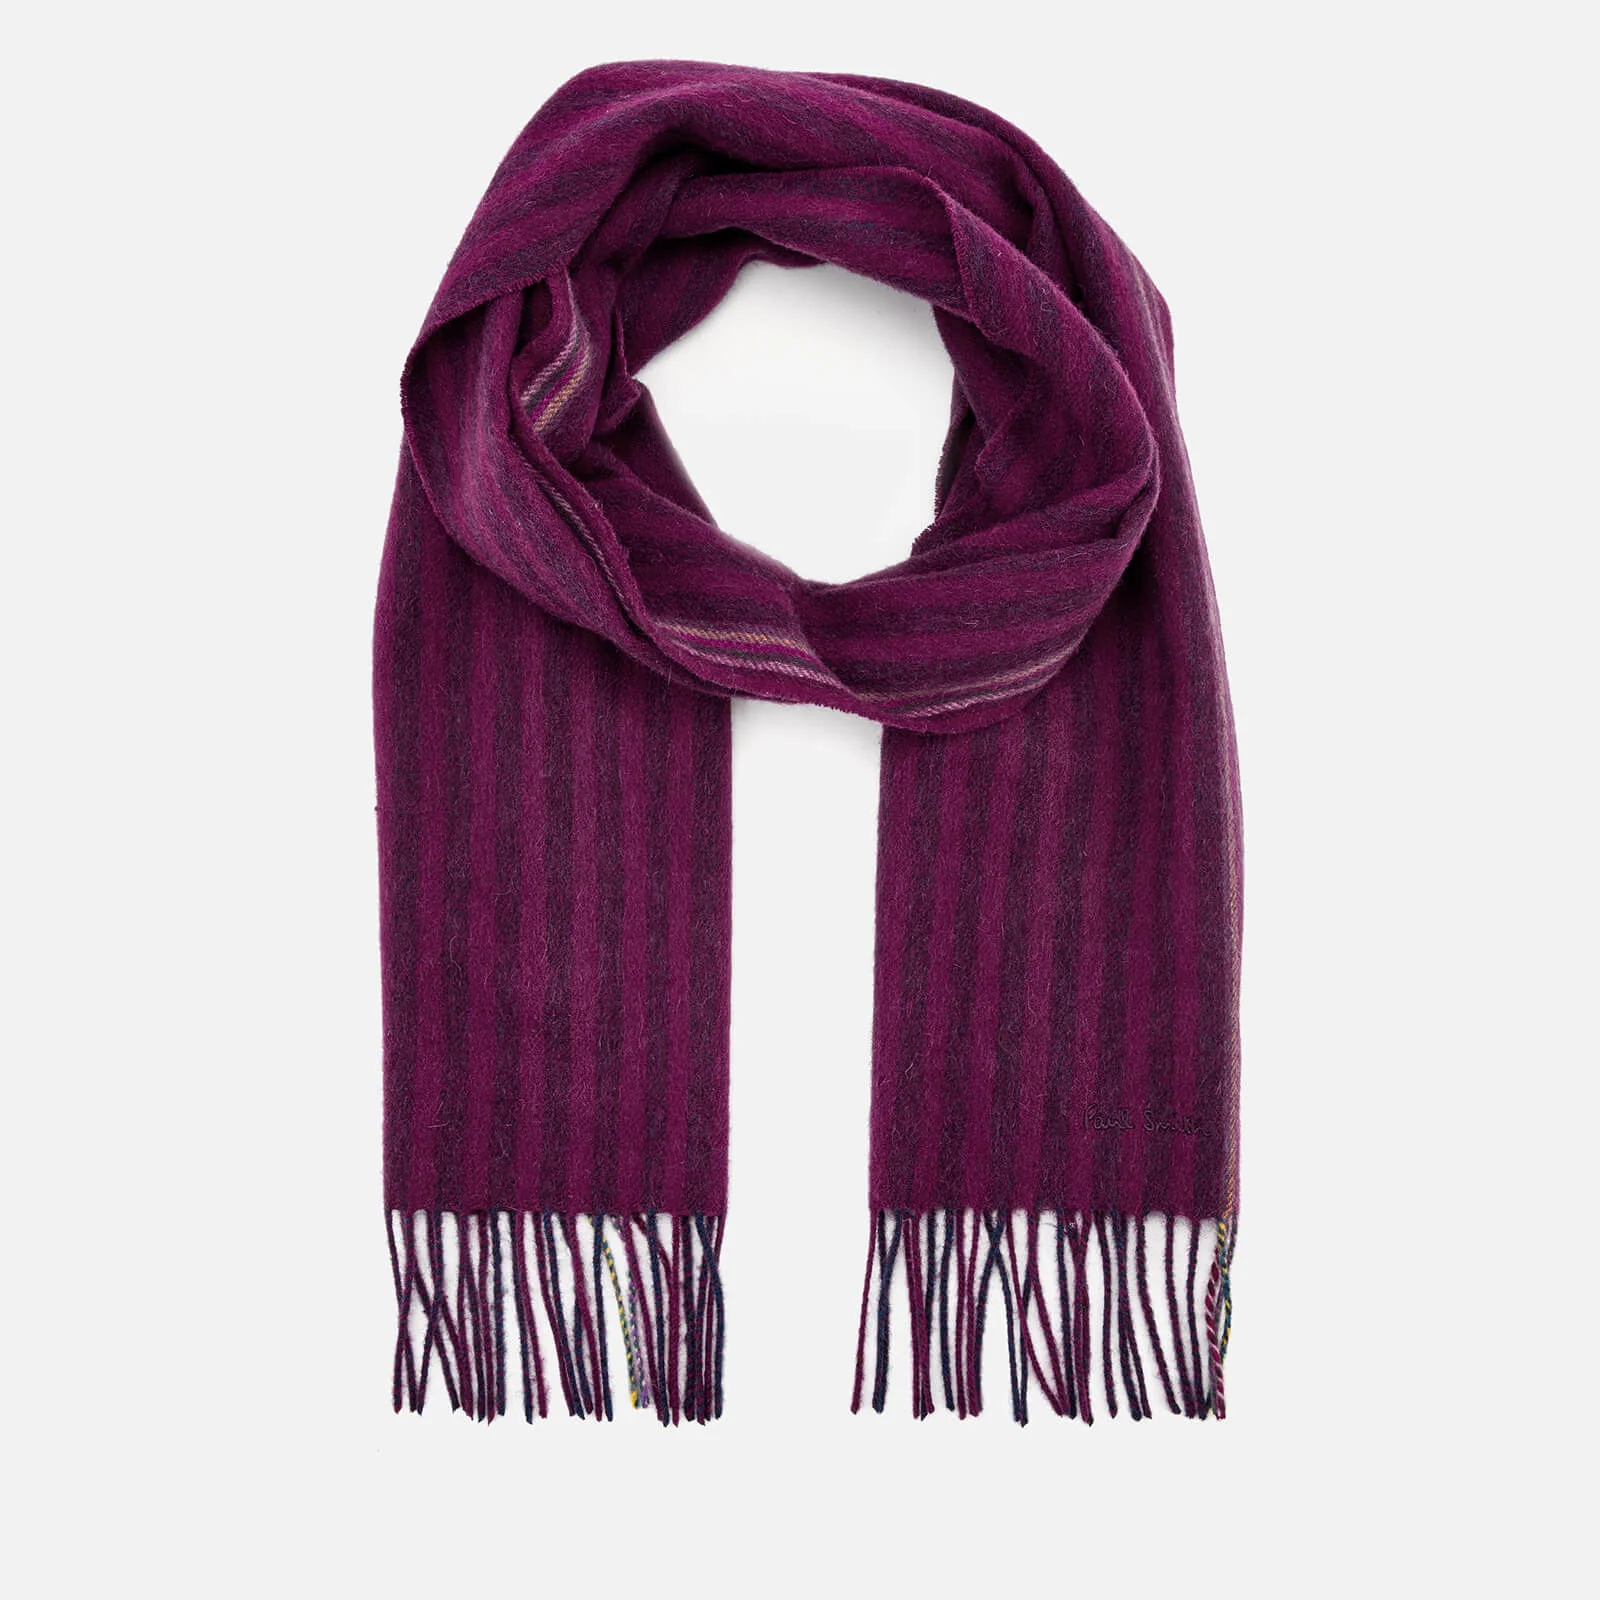 Paul Smith Men's Two Stripe Scarf - Pink Image 1